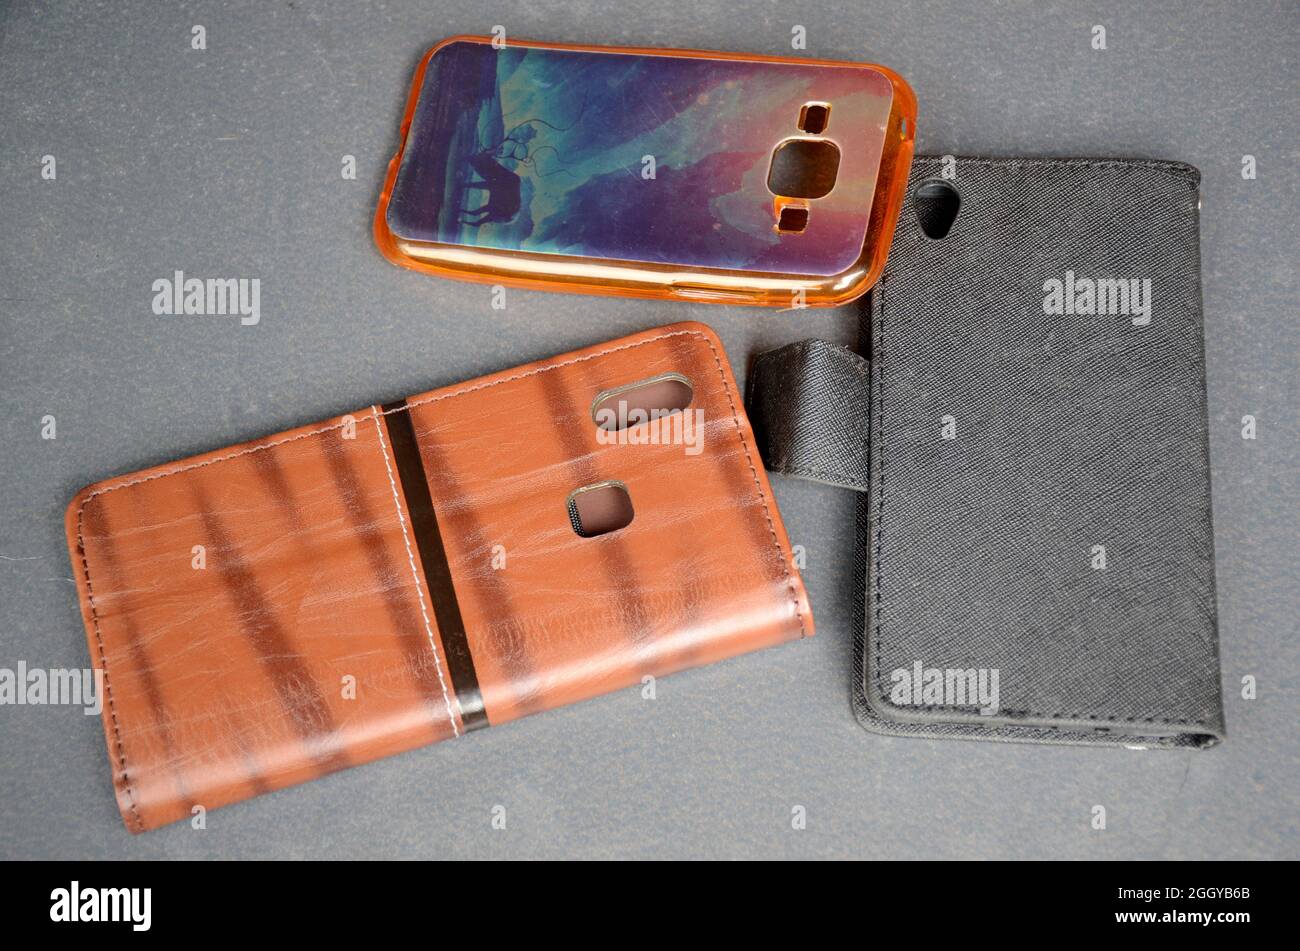 Closeup shot of three different phone cases on a marble surface Stock Photo